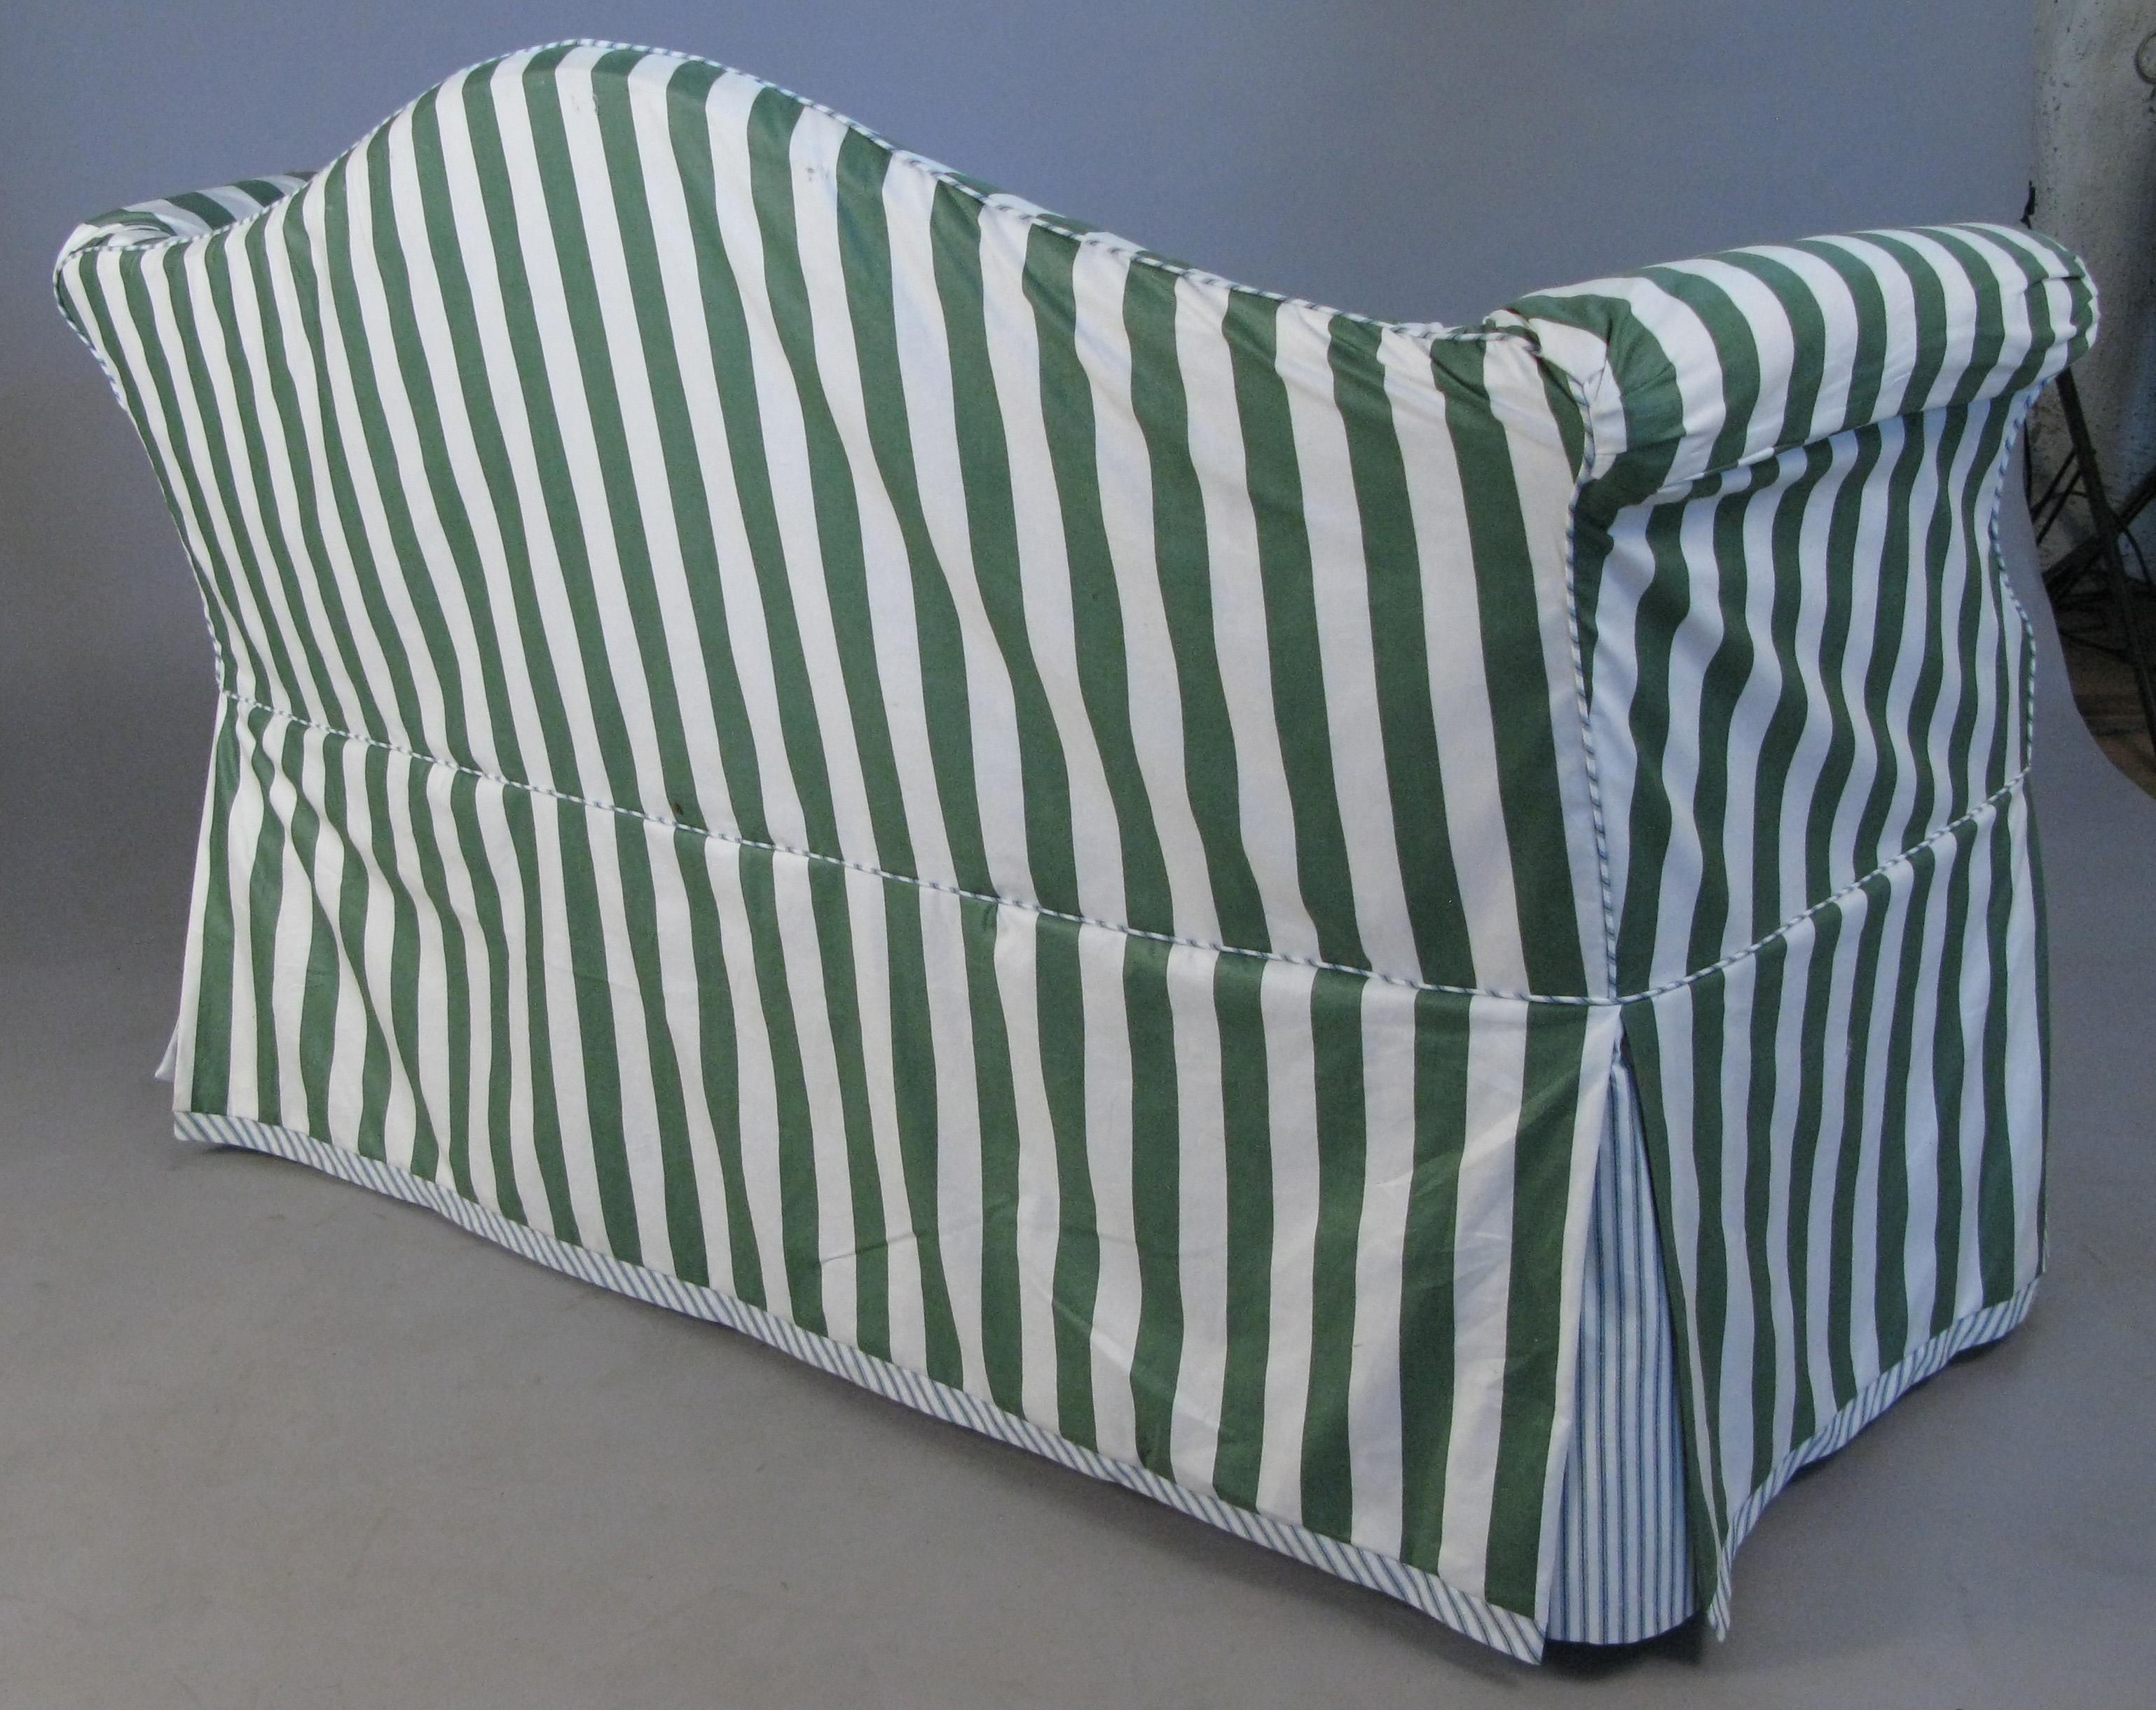 Pair of Petite Camelback Settees with Slipcovers in Green & White 1